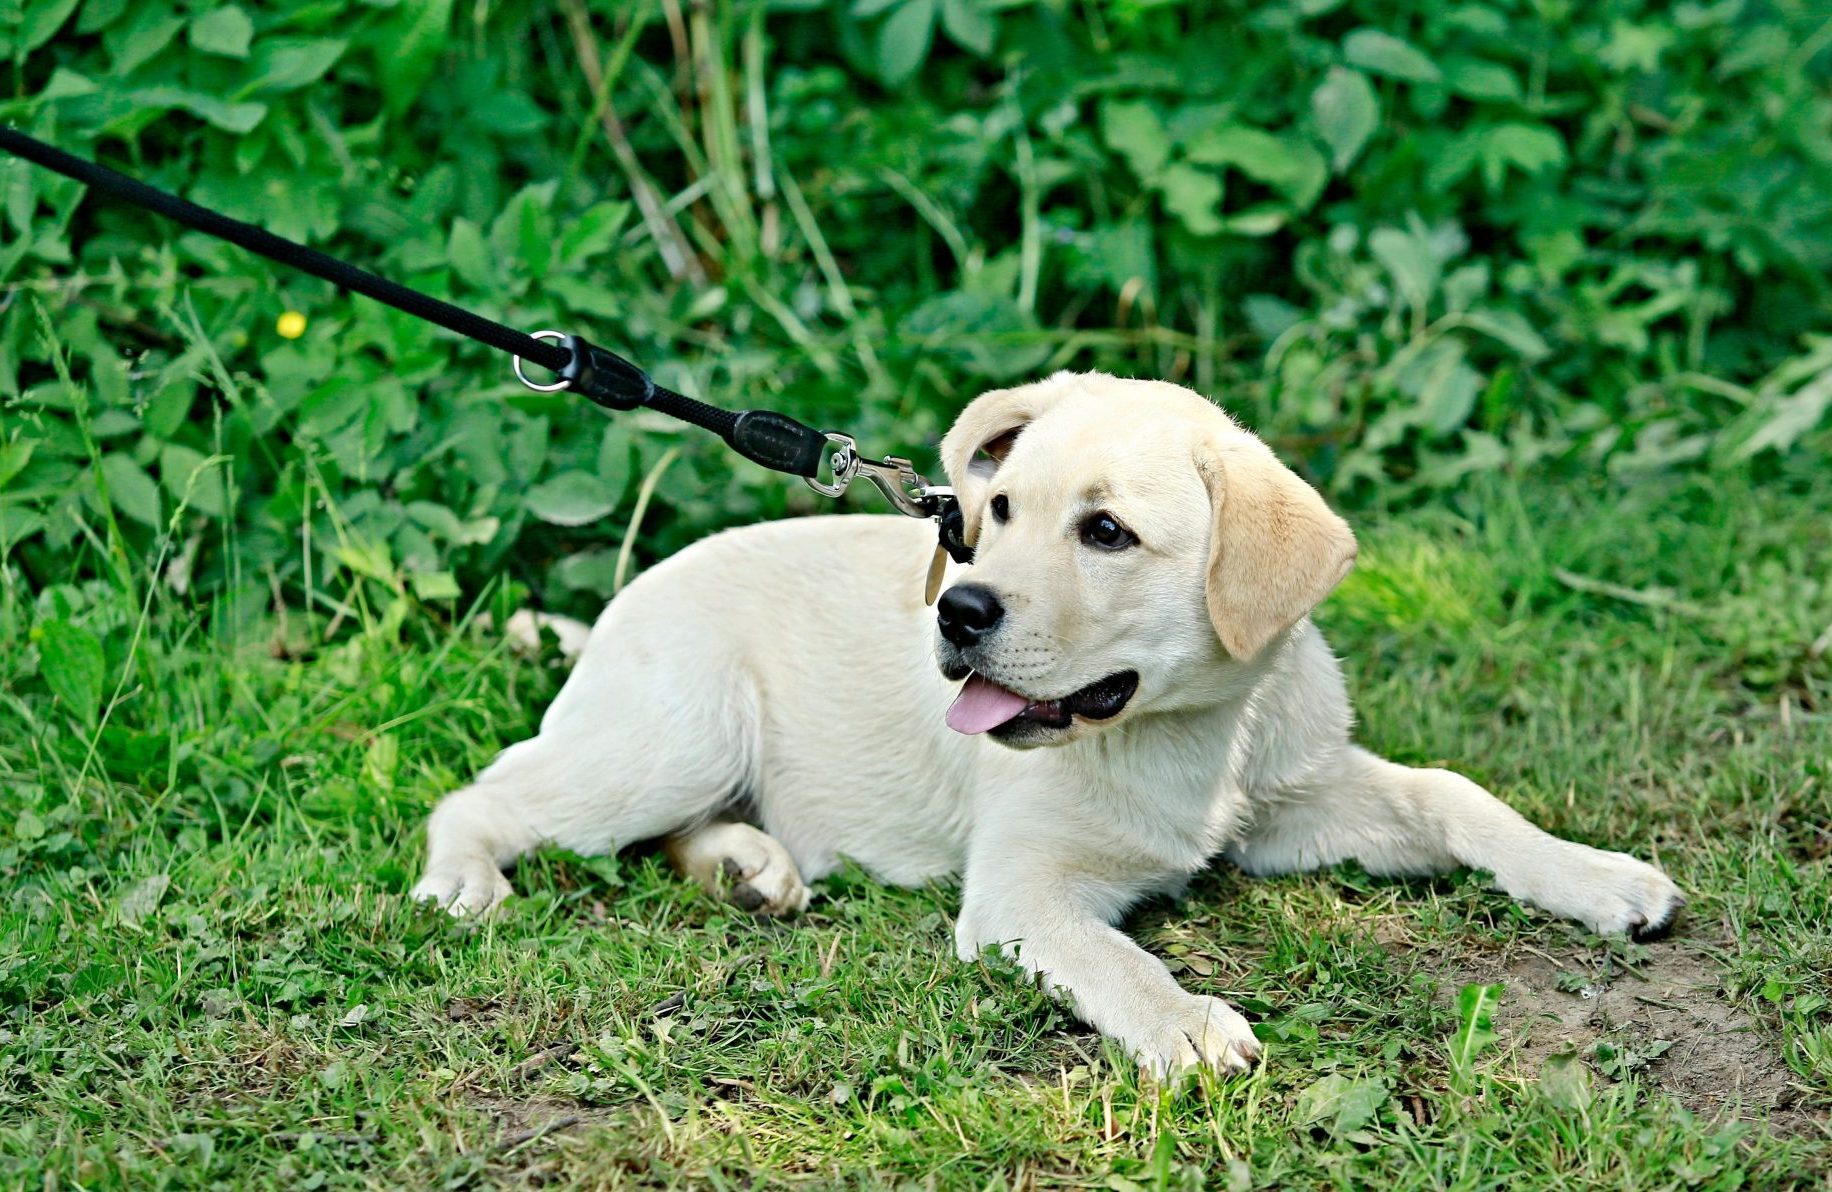 Choosing the Right Collar and Leash for Your Pup